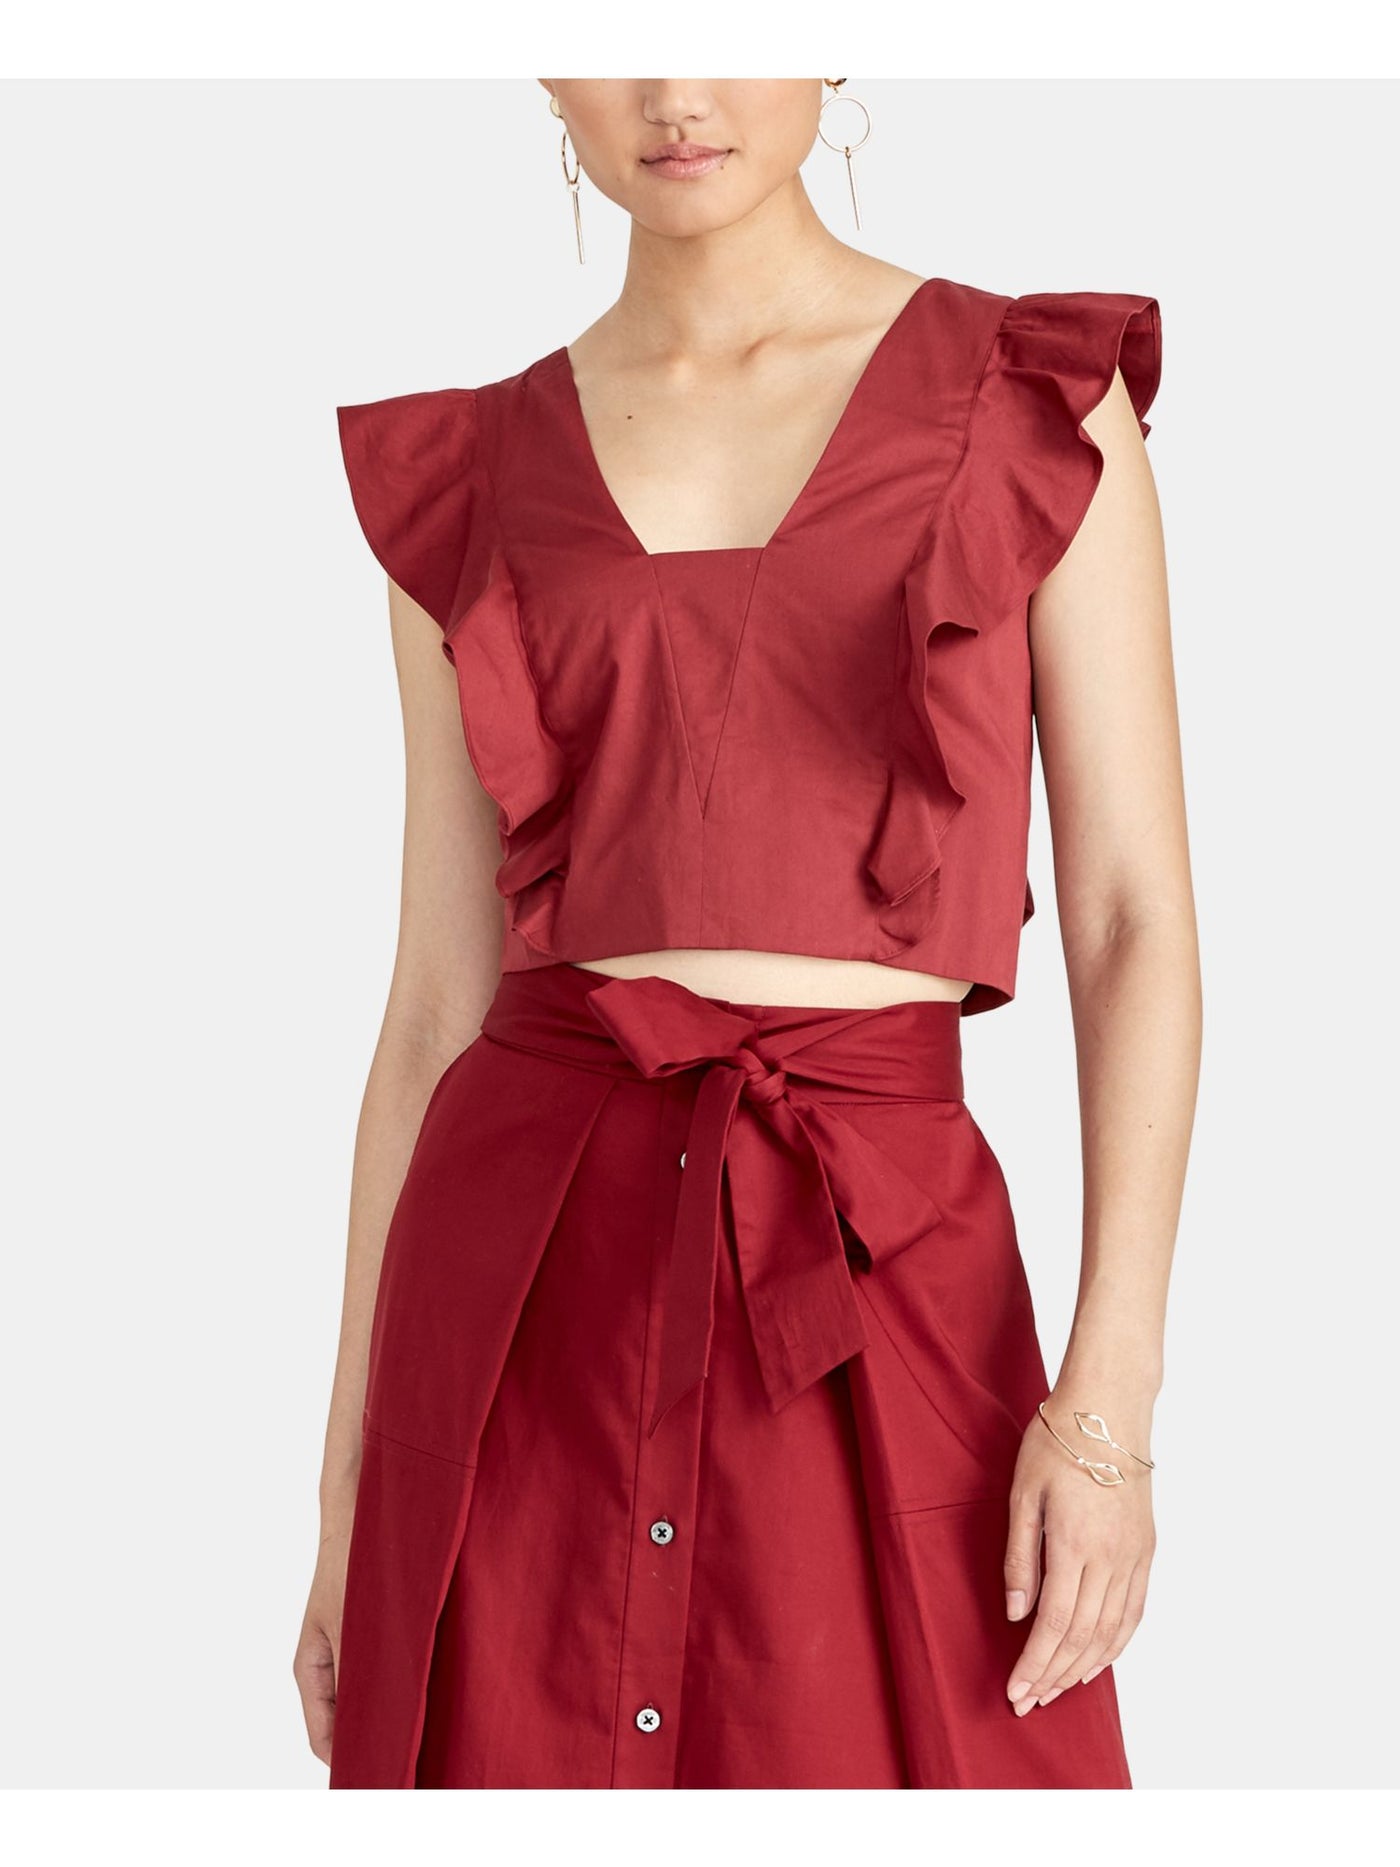 RACHEL ROY Womens Red Ruffled Flutter Sleeves Tie Back Square Neck Crop Top L